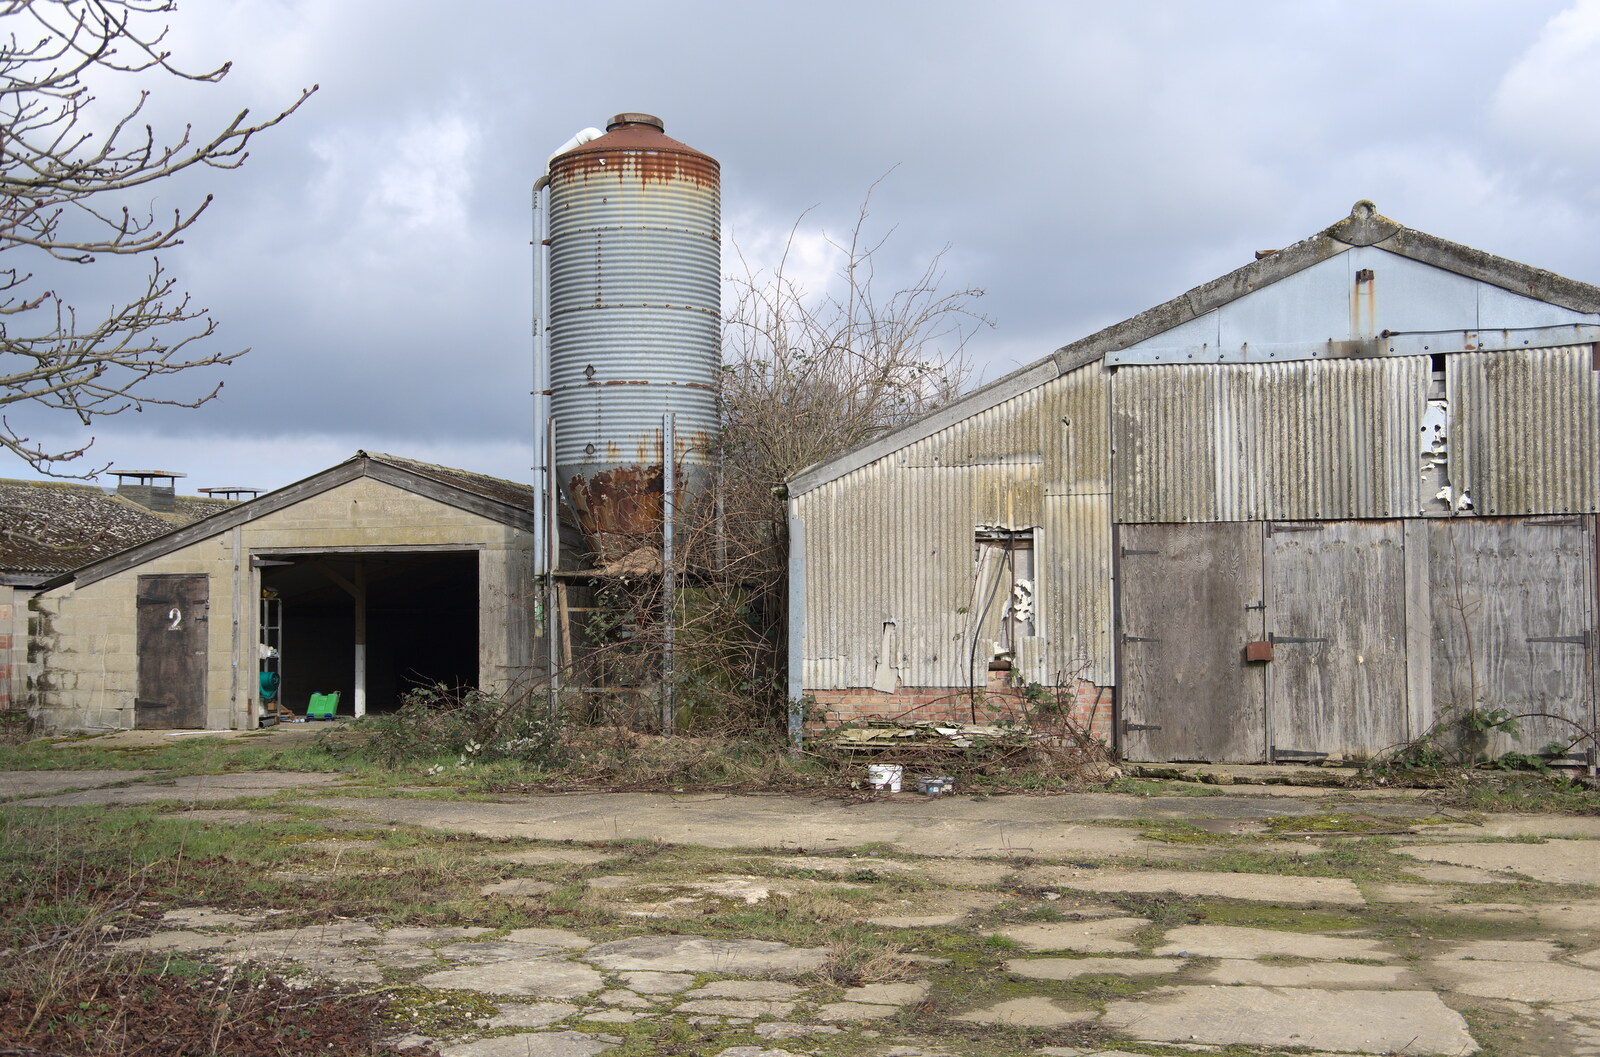 Derelict farm buildings from Weybread Pits and a Sunday Walk, Brome, Suffolk - 6th March 2022